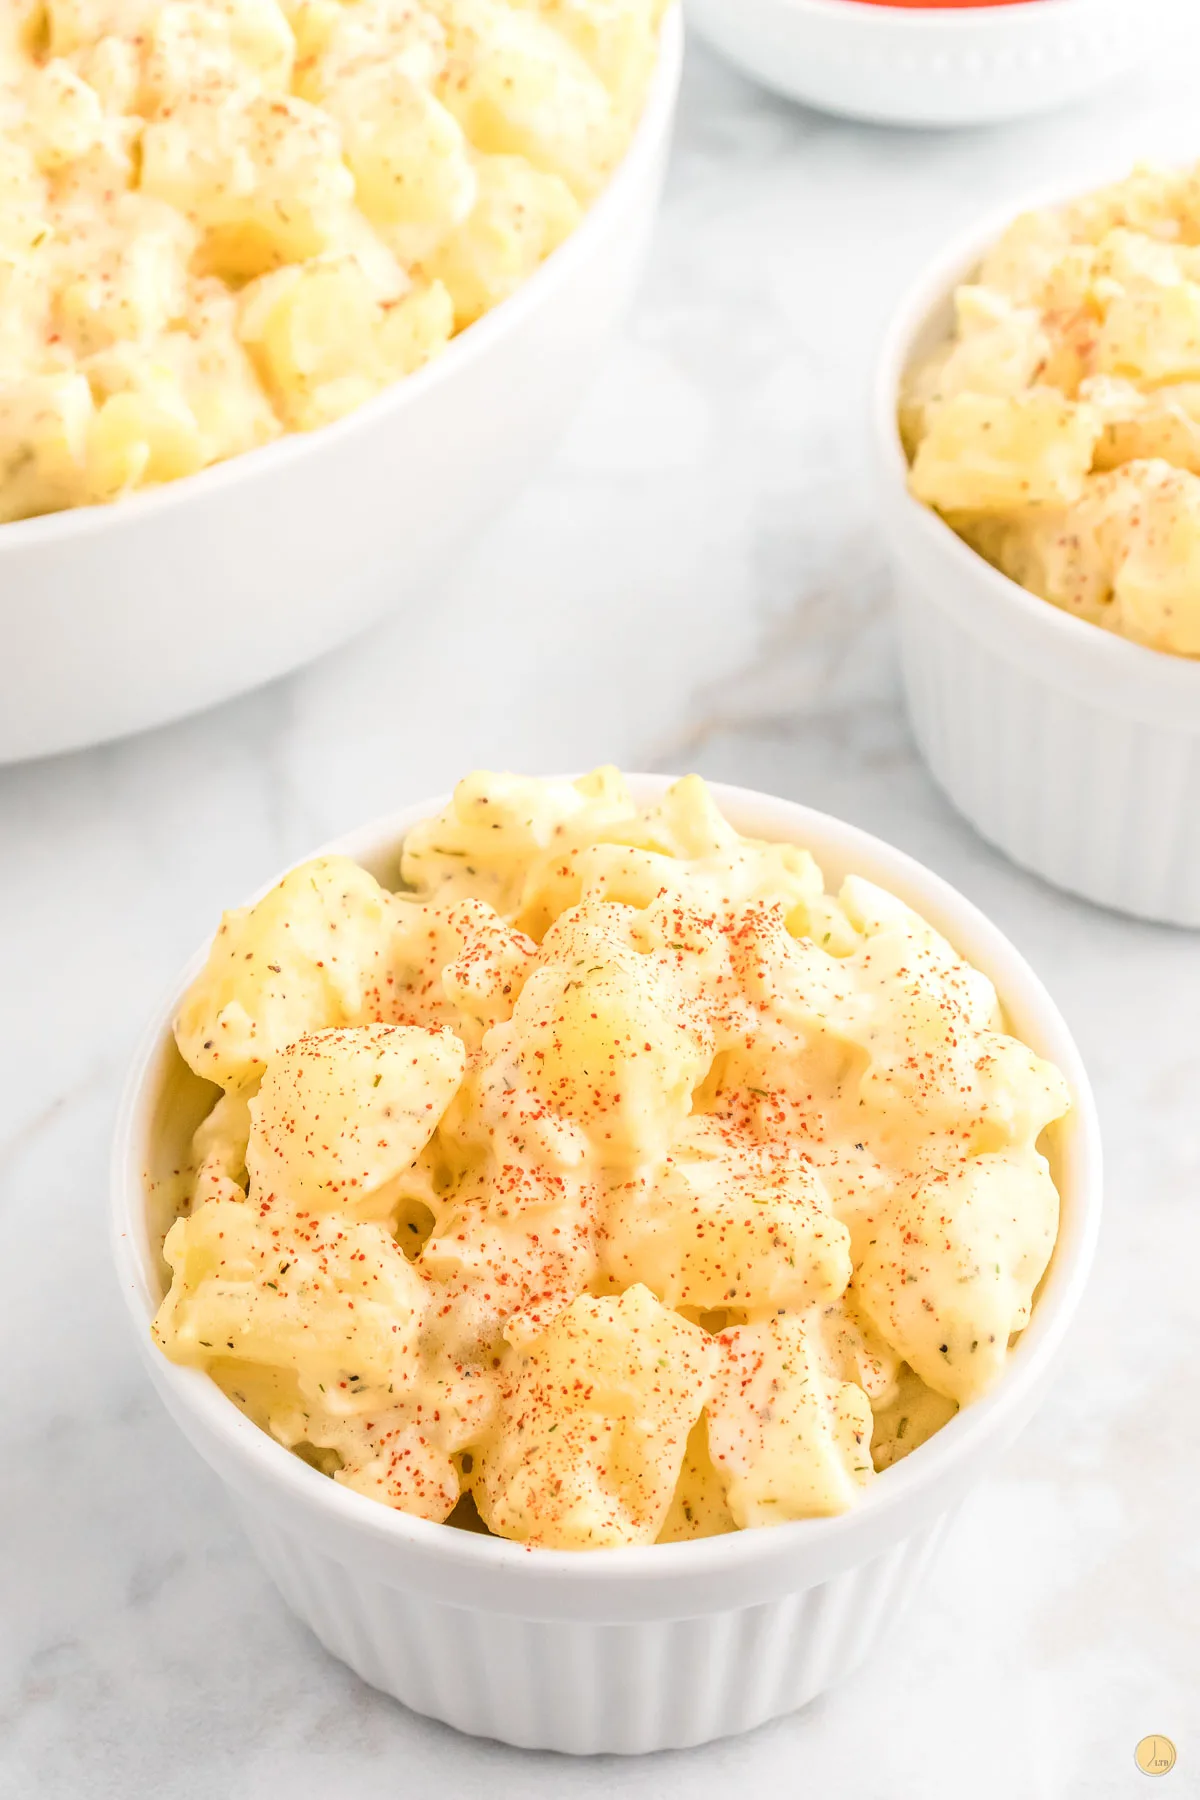 bowl of potato salad that is perfect to serve with meatballs